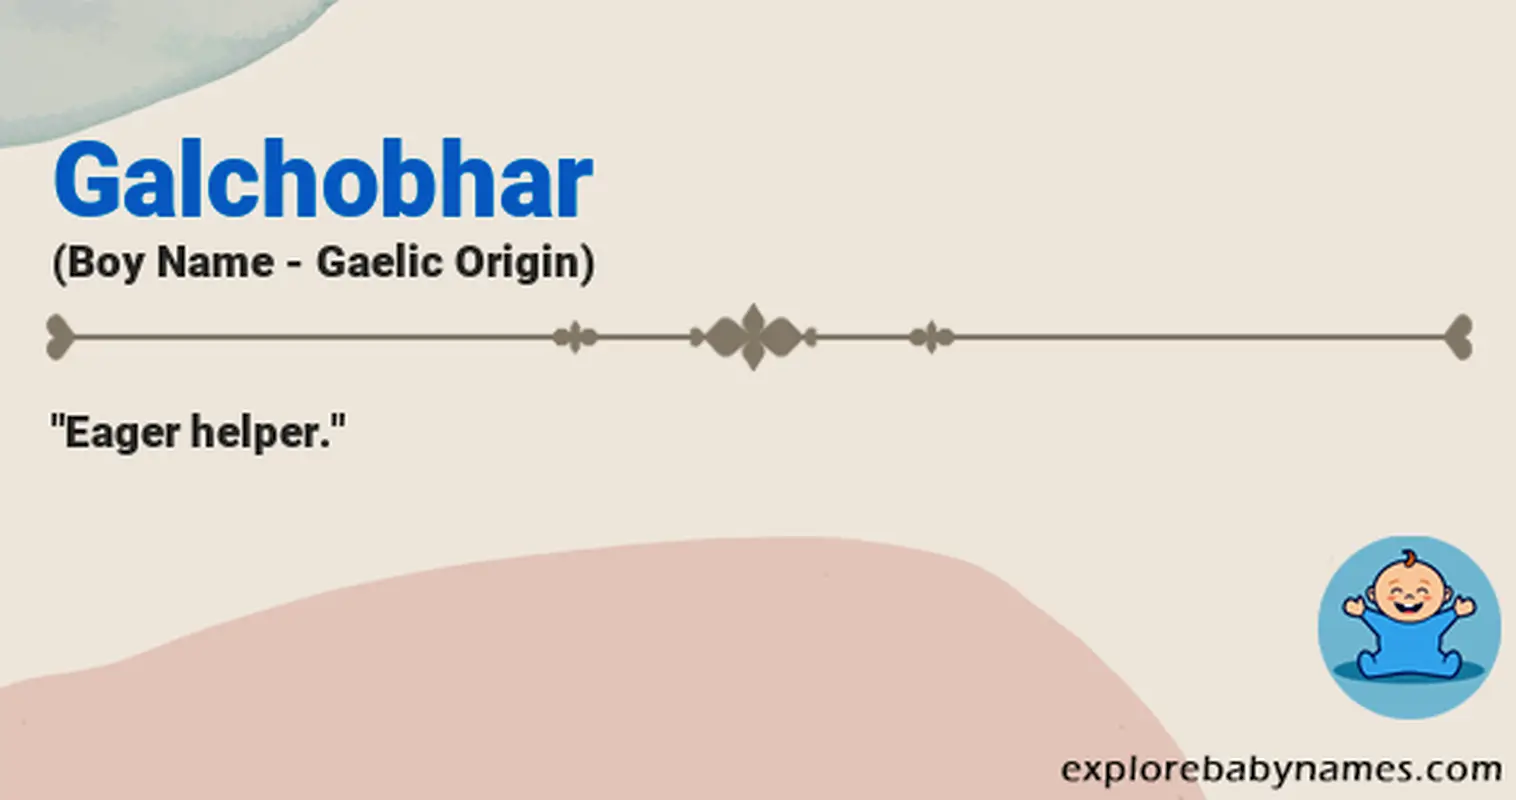 Meaning of Galchobhar